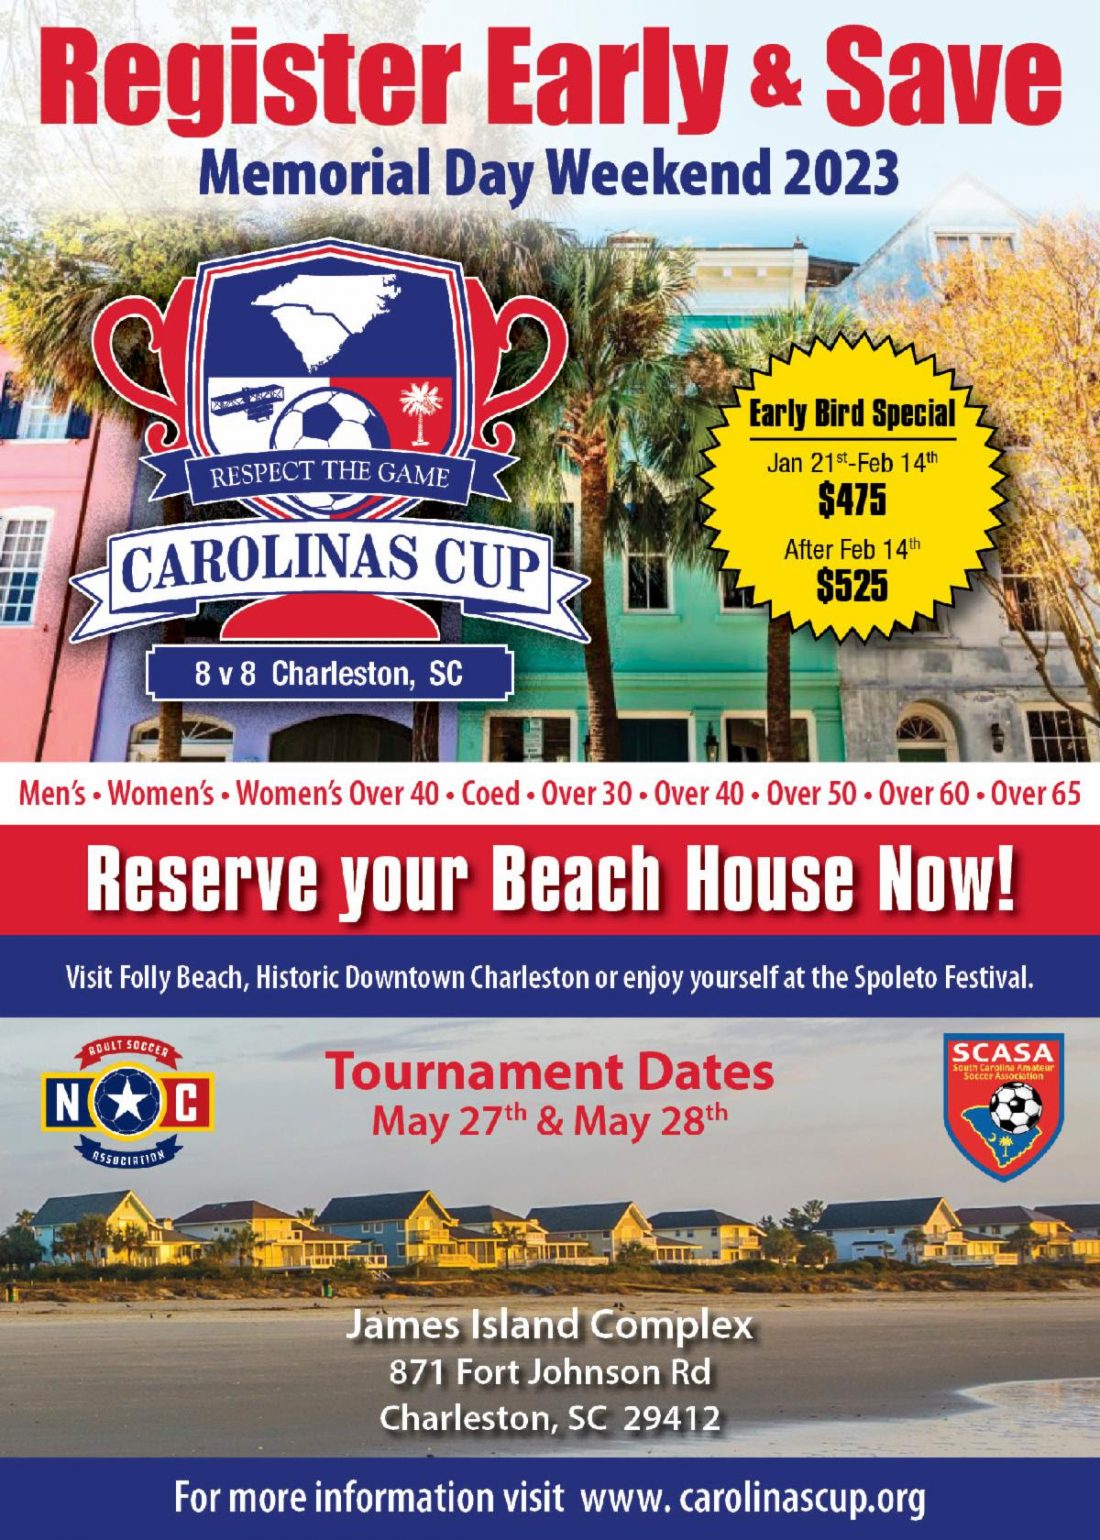 unnamed-3-1-1100x1540 8v8 Carolinas Cup Charleston - Memorial Day Weekend - REGISTER NOW!!